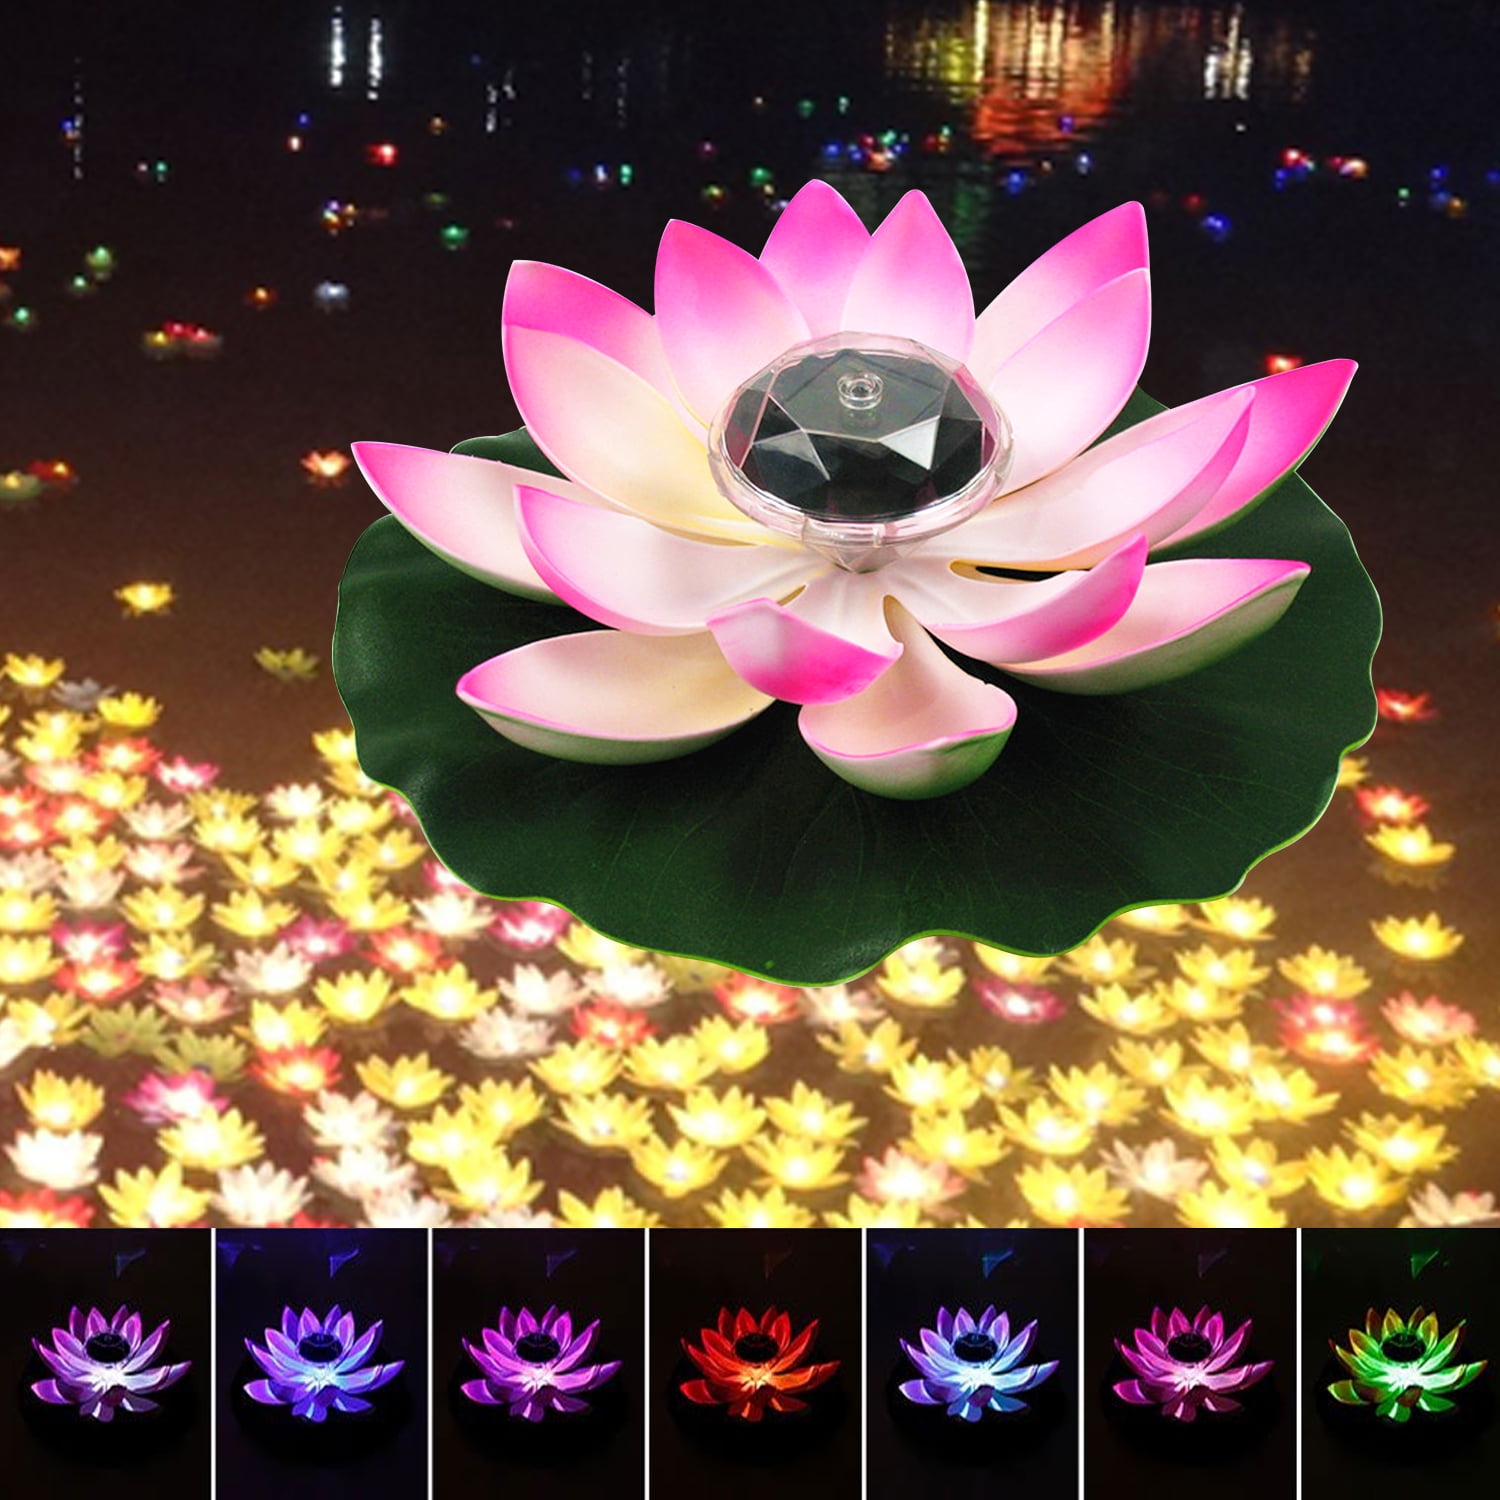 Garden Romantic Dinner Details about   LOTUS FLOWER-CHANGES COLORS Floating Pool LED Lamp. 